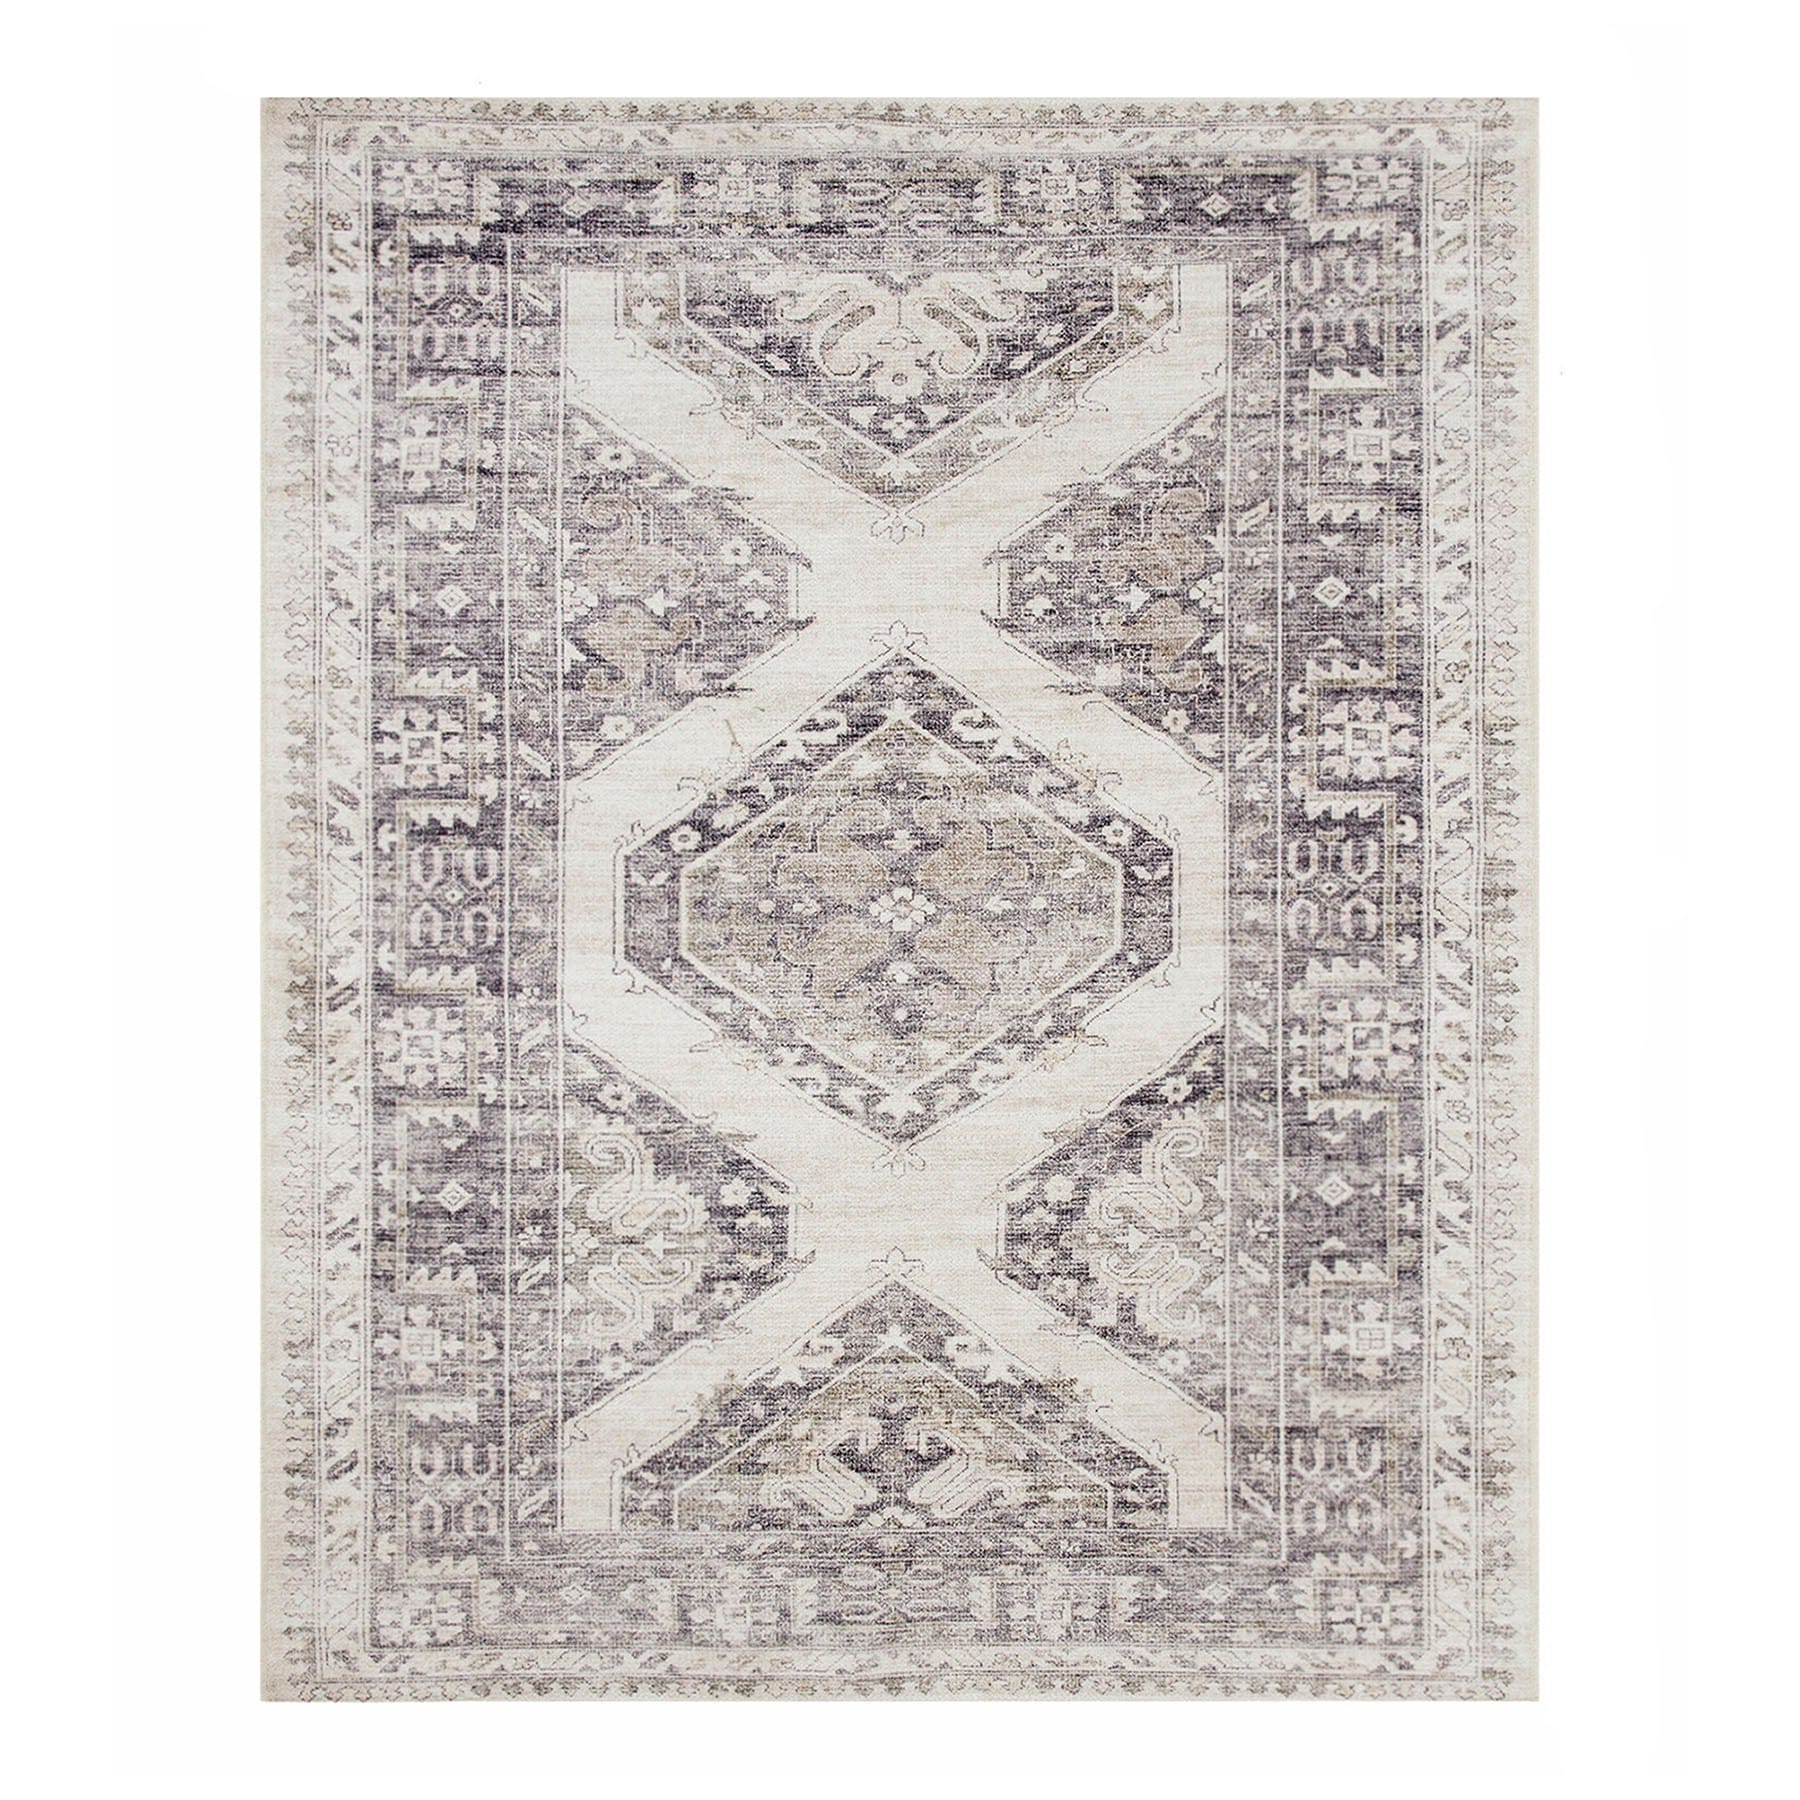 (B829) Grey & White Floral Washable Area Rug, 8x10 - nybusiness